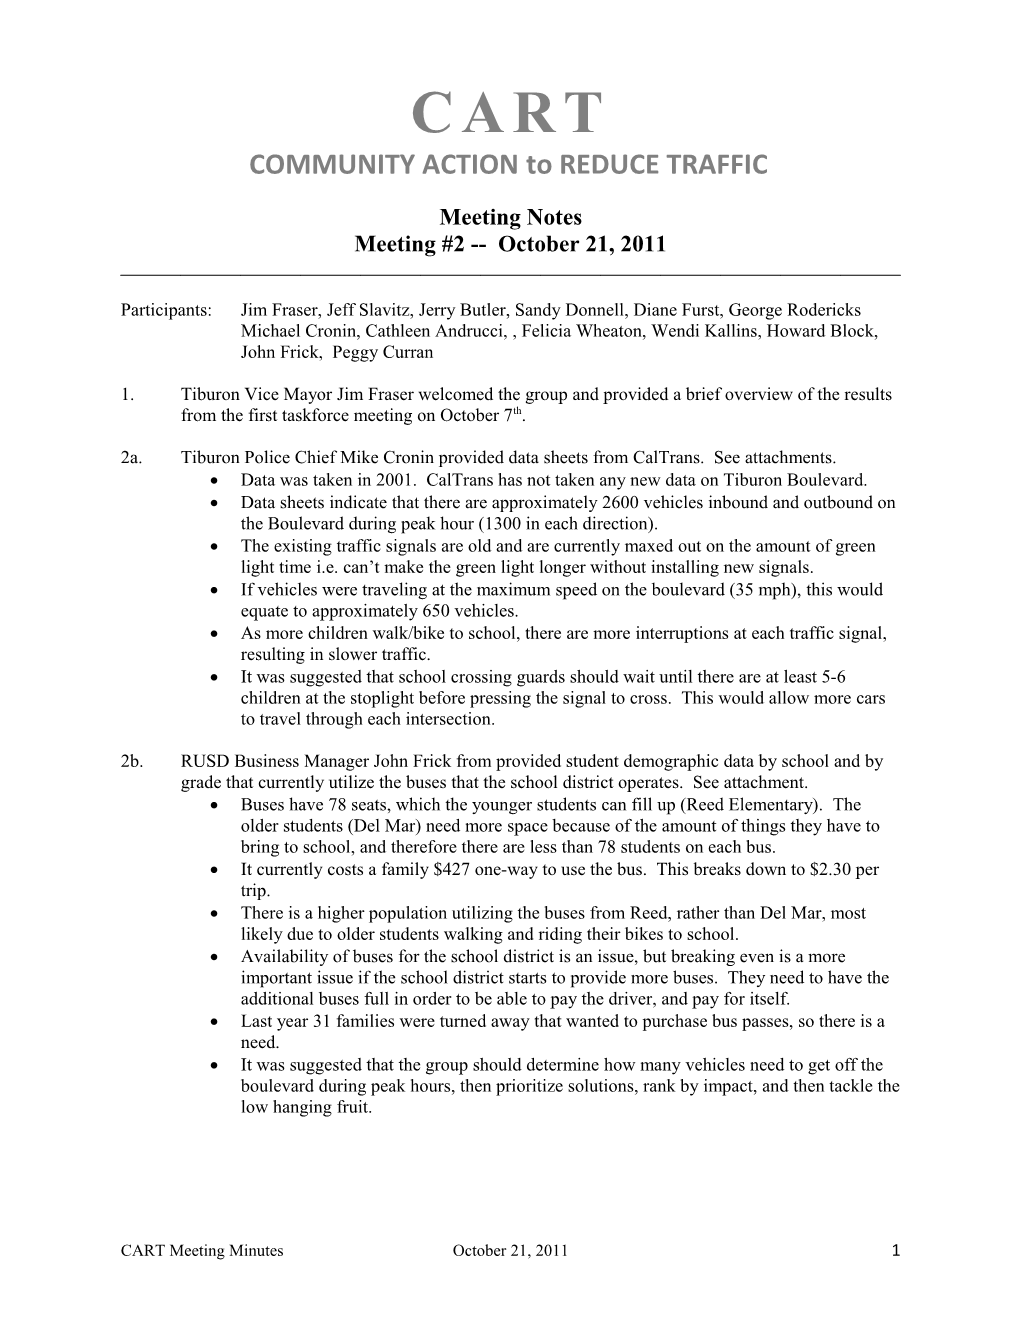 Community Action to Reduce Traffic (CART) Meeting Minutes